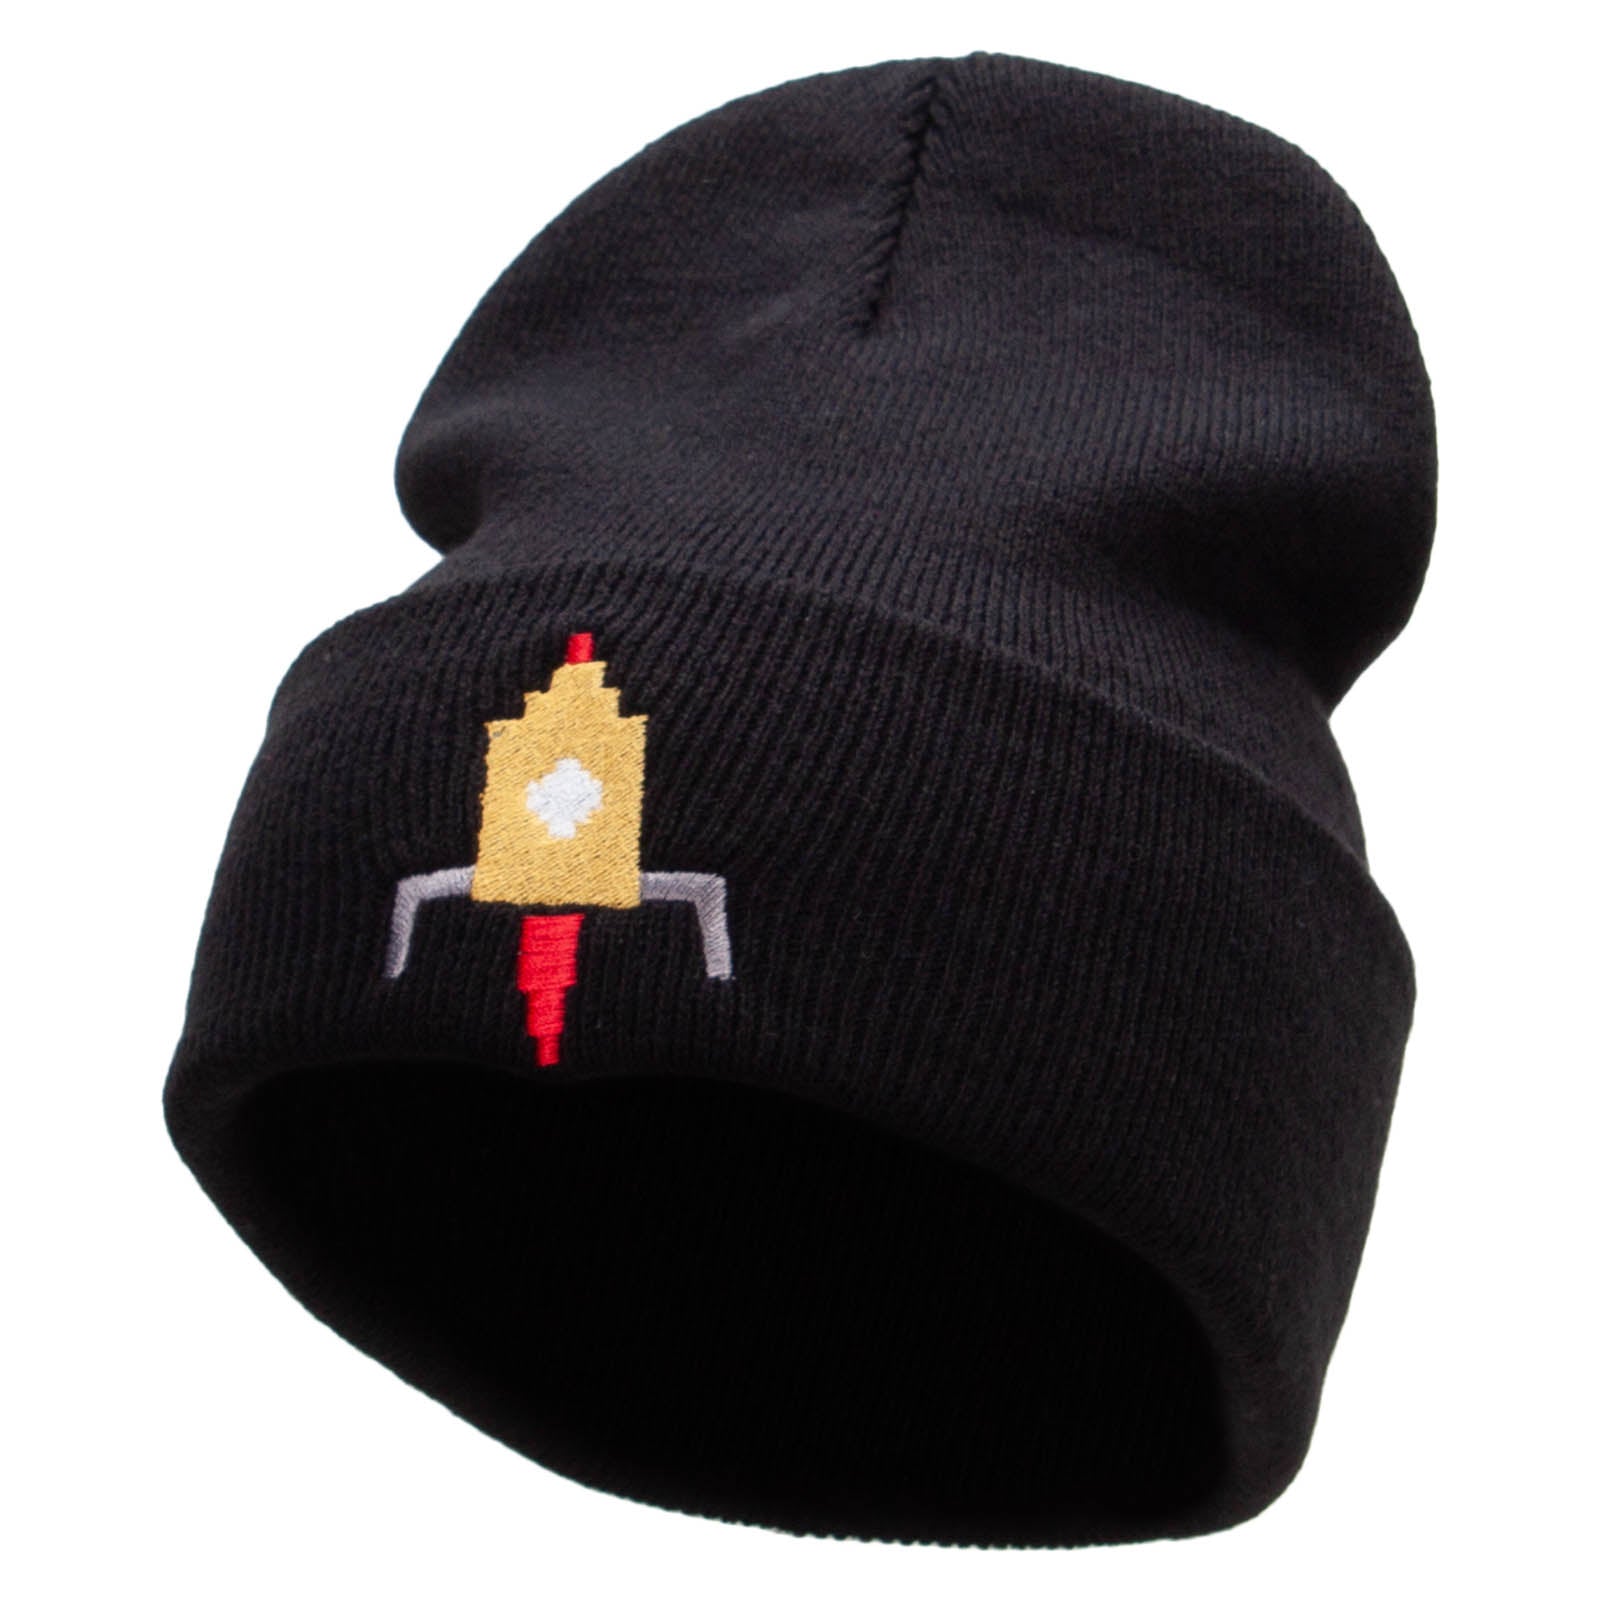 Space Ship Embroidered 12 Inch Long Knitted Beanie - Black OSFM